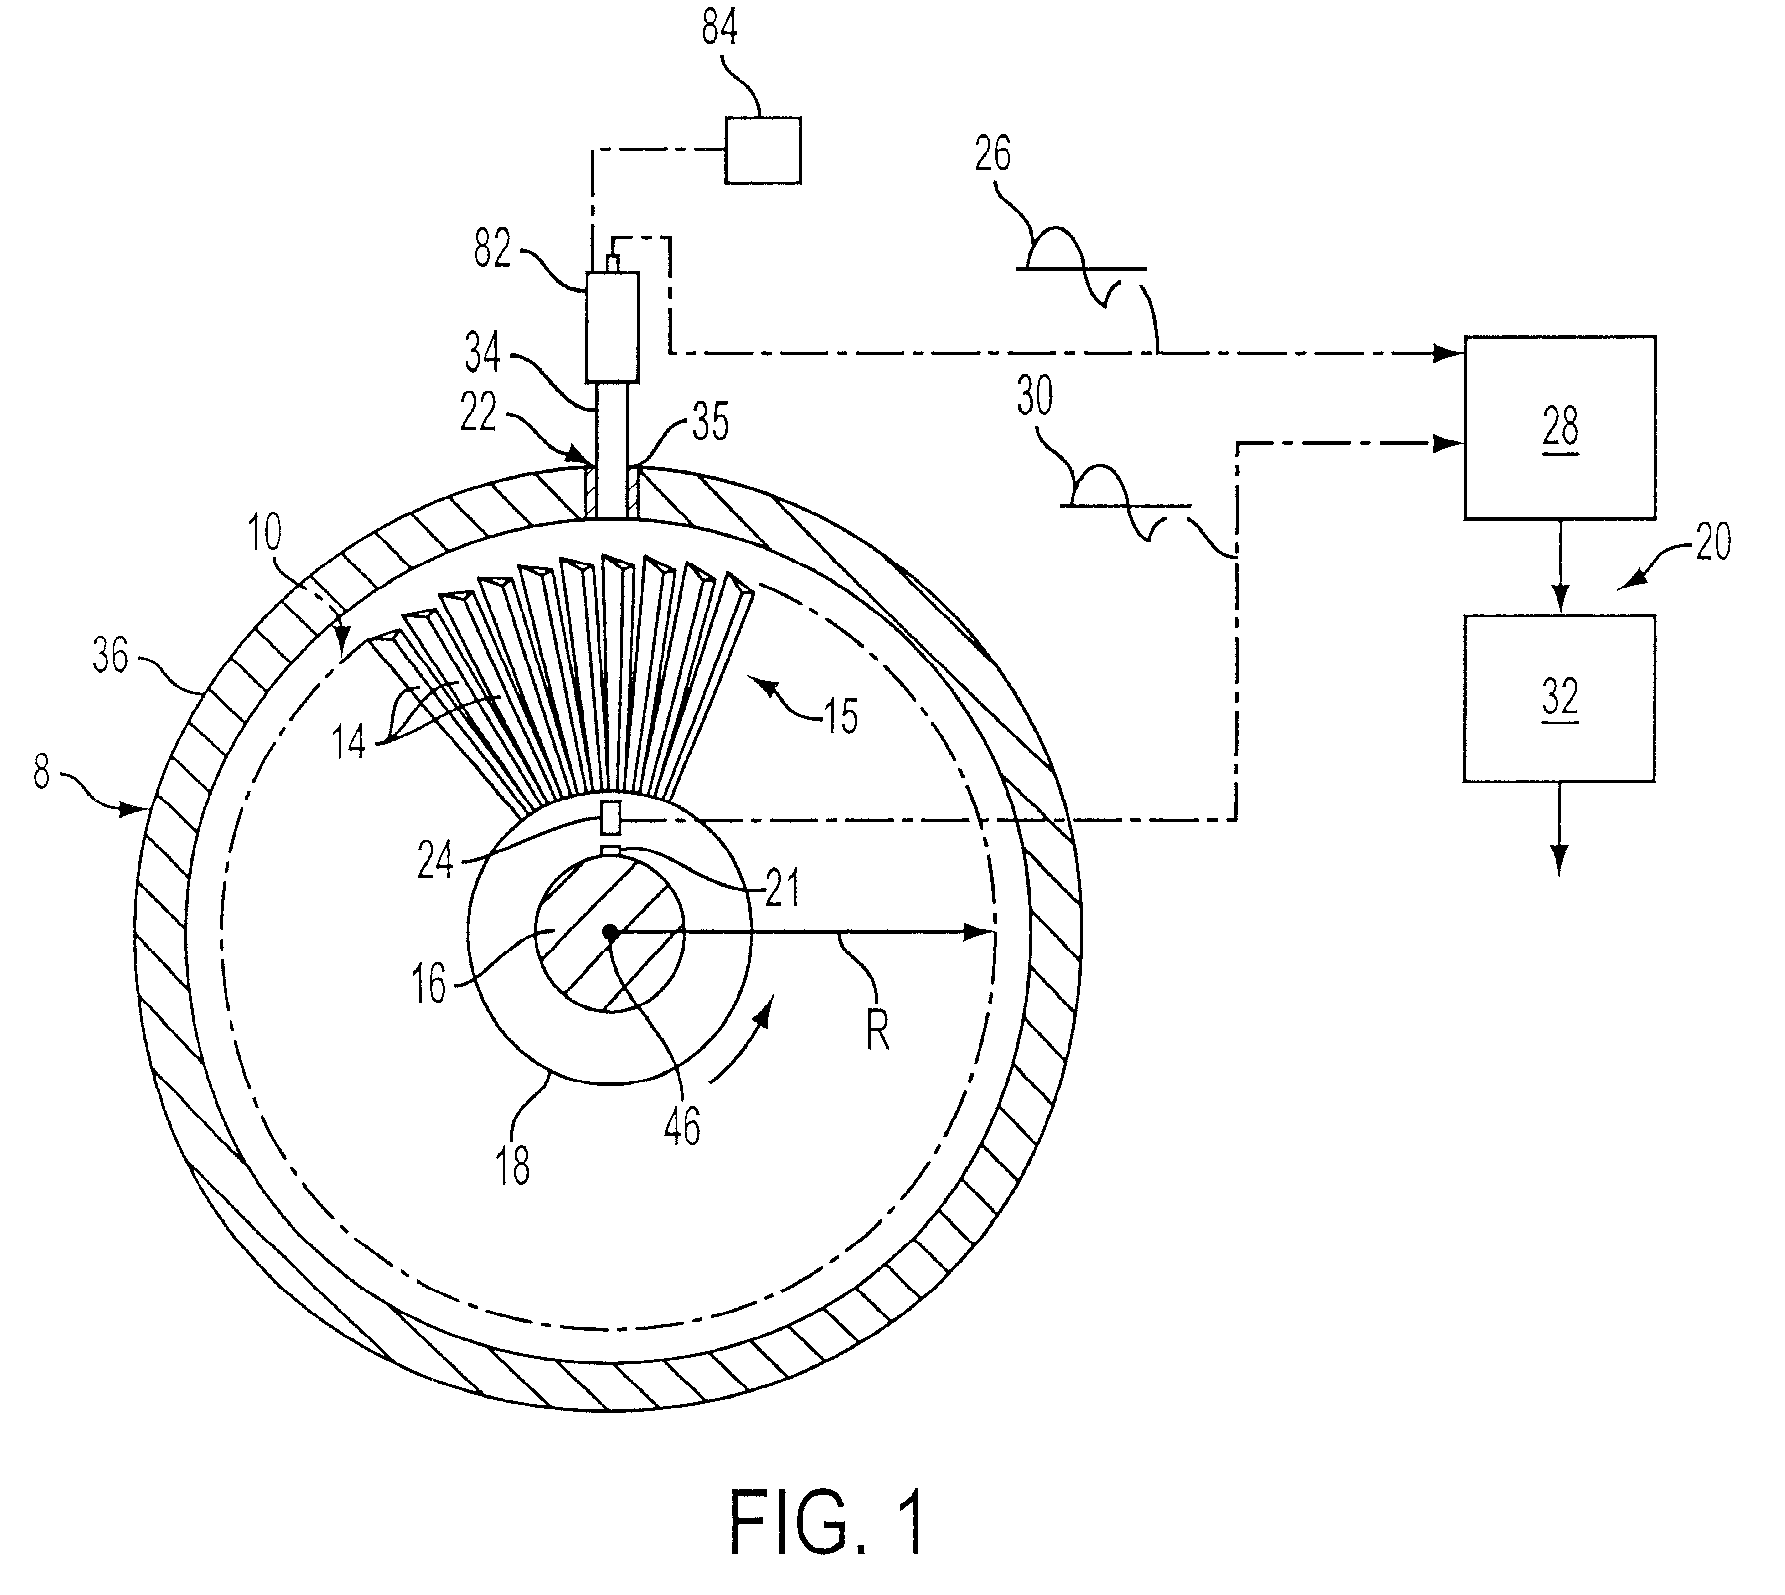 Method and Apparatus for Tracking a Rotating Blade Tip for Blade Vibration Monitor Measurements